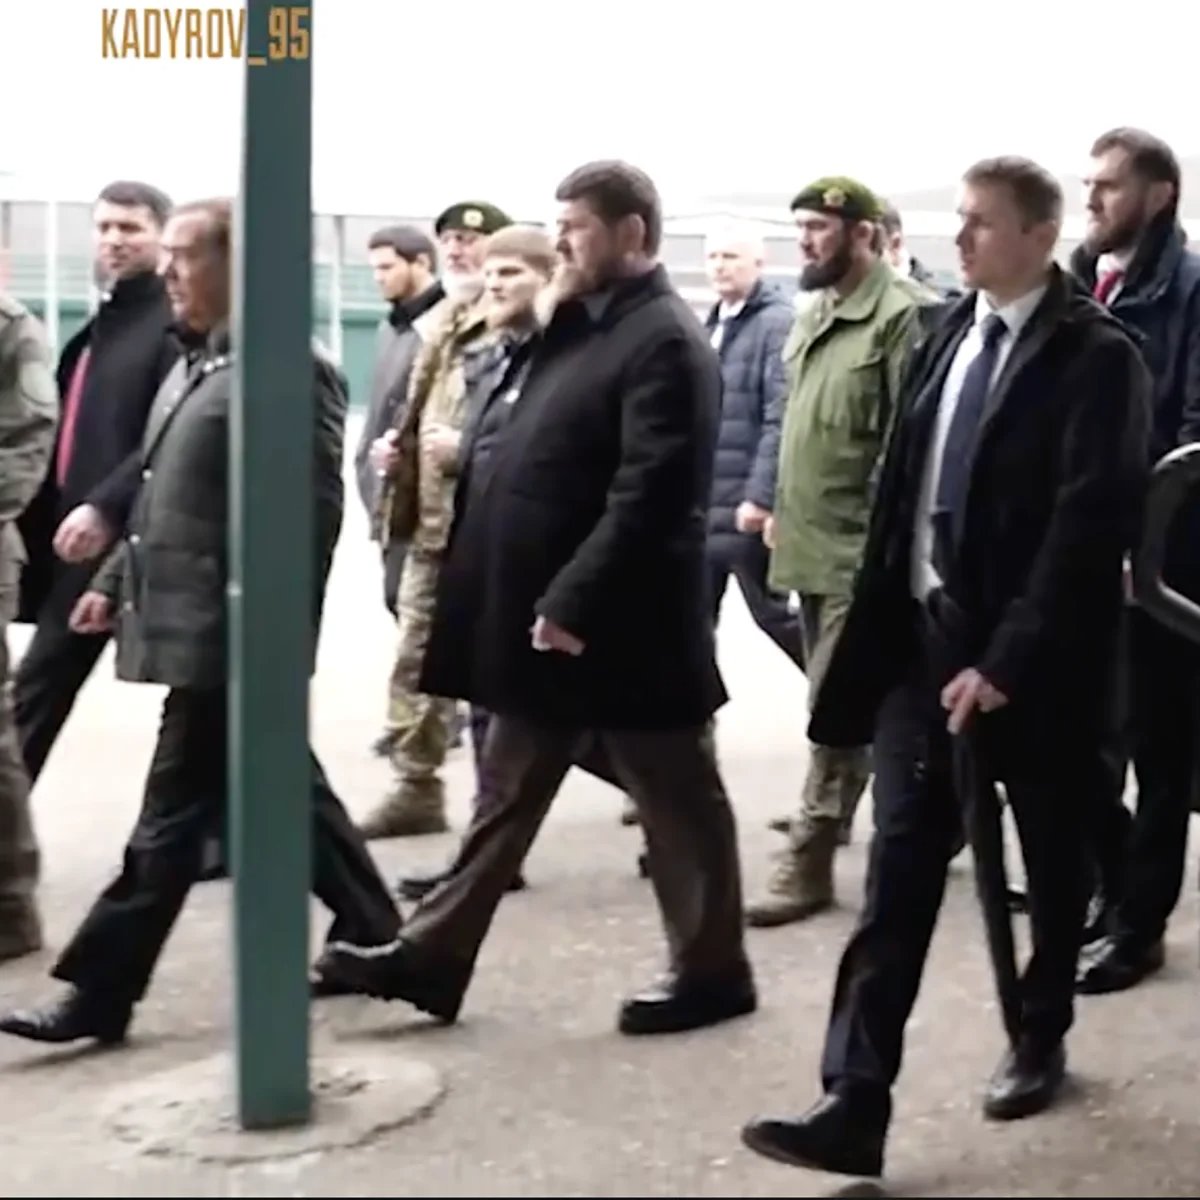 Dmitry Medvedev visiting Grozny in winter 2024. The photo shows Kadyrov’s swollen abdomen. A screenshot from the video